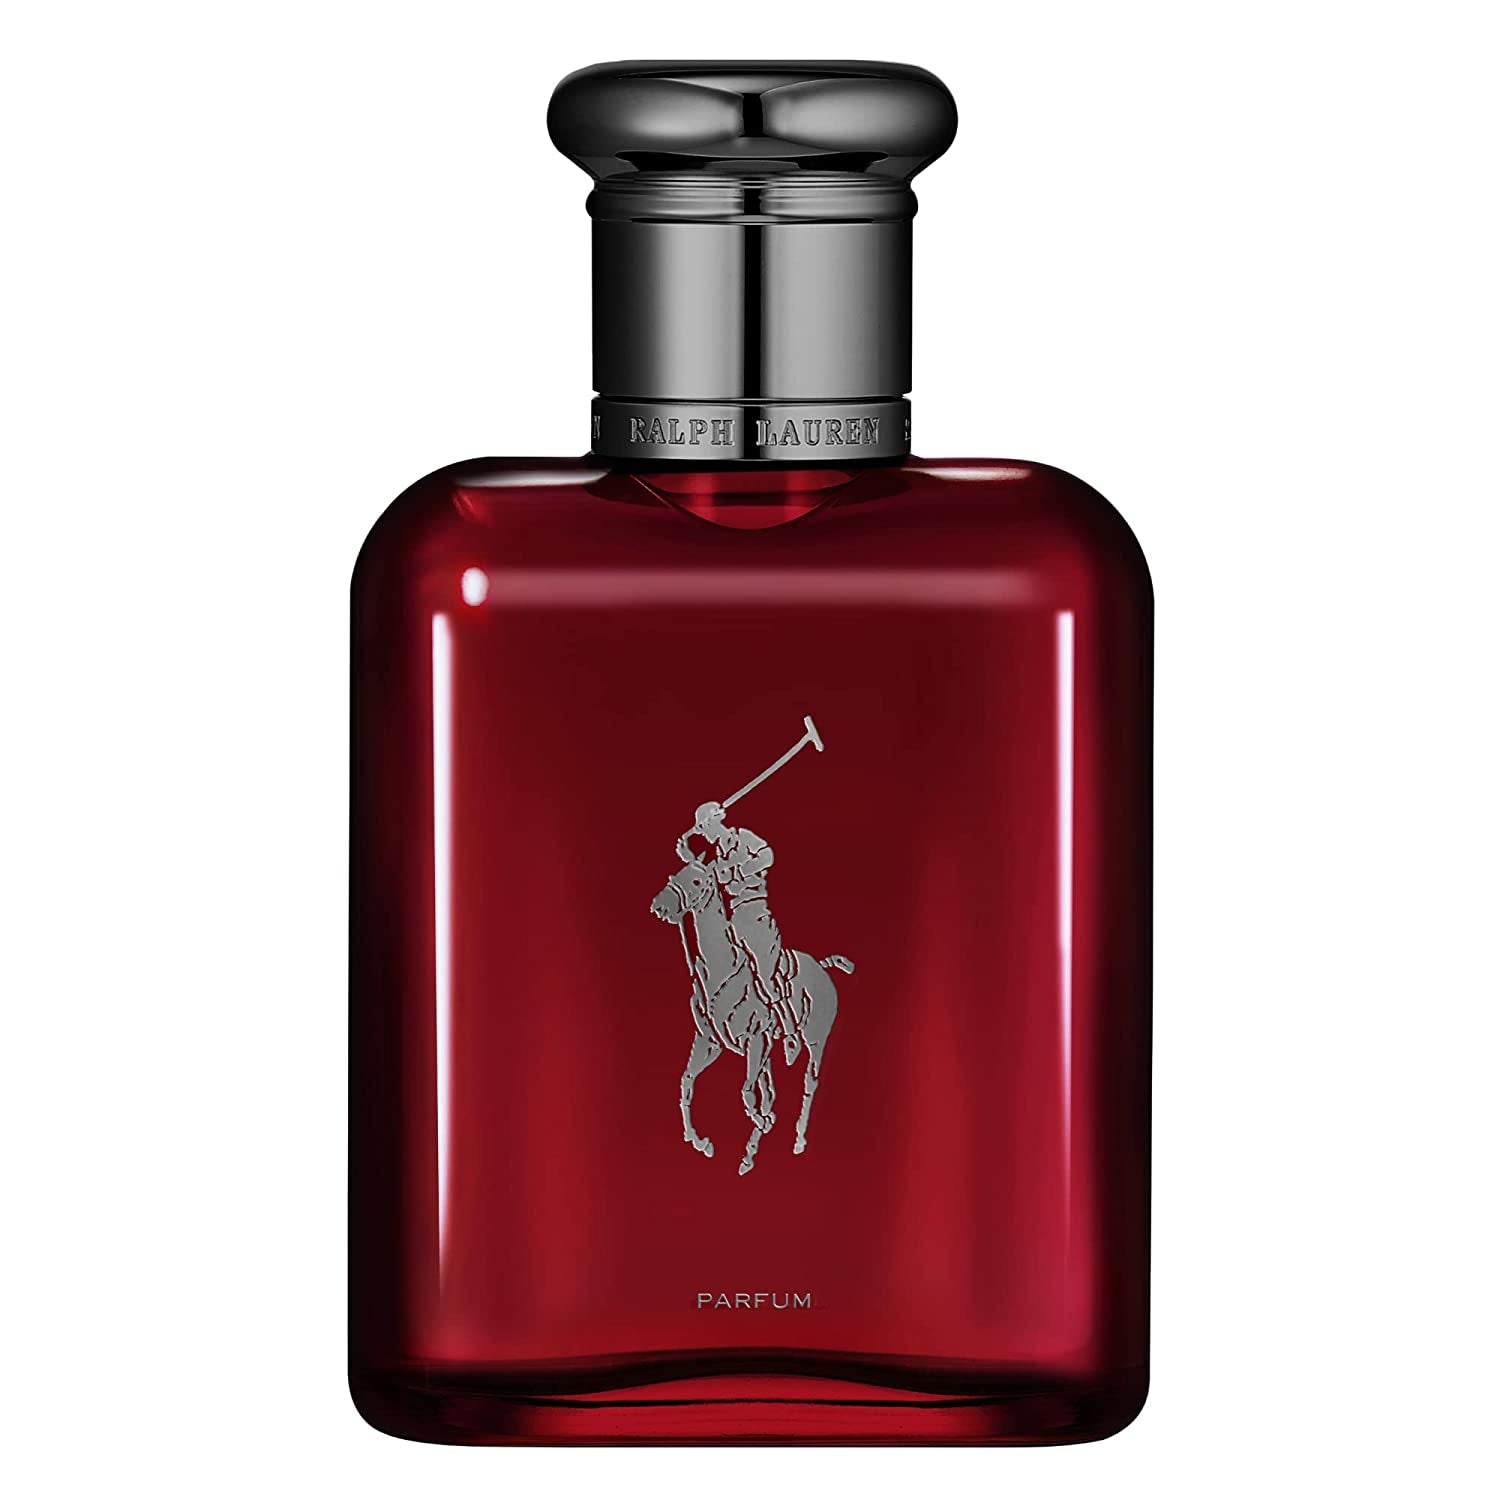 Ralph Lauren - Polo Red - Parfum - Men's Cologne - Ambery & Woody - Wi –  Mr.Smell Good